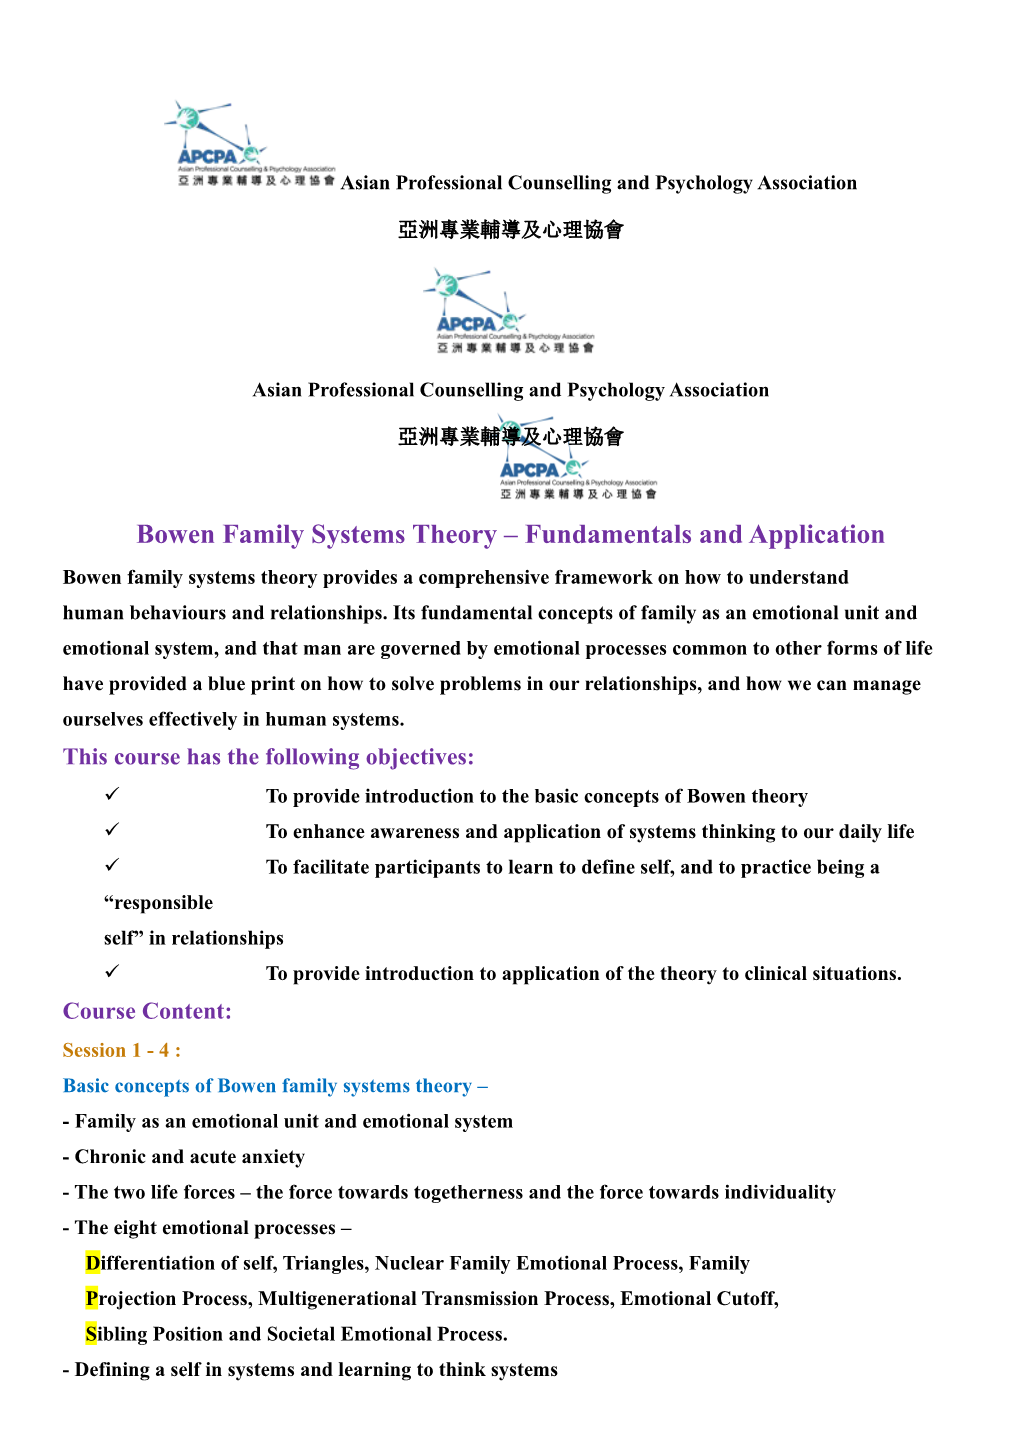 Bowen Family Systems Theory Fundamentals and Application